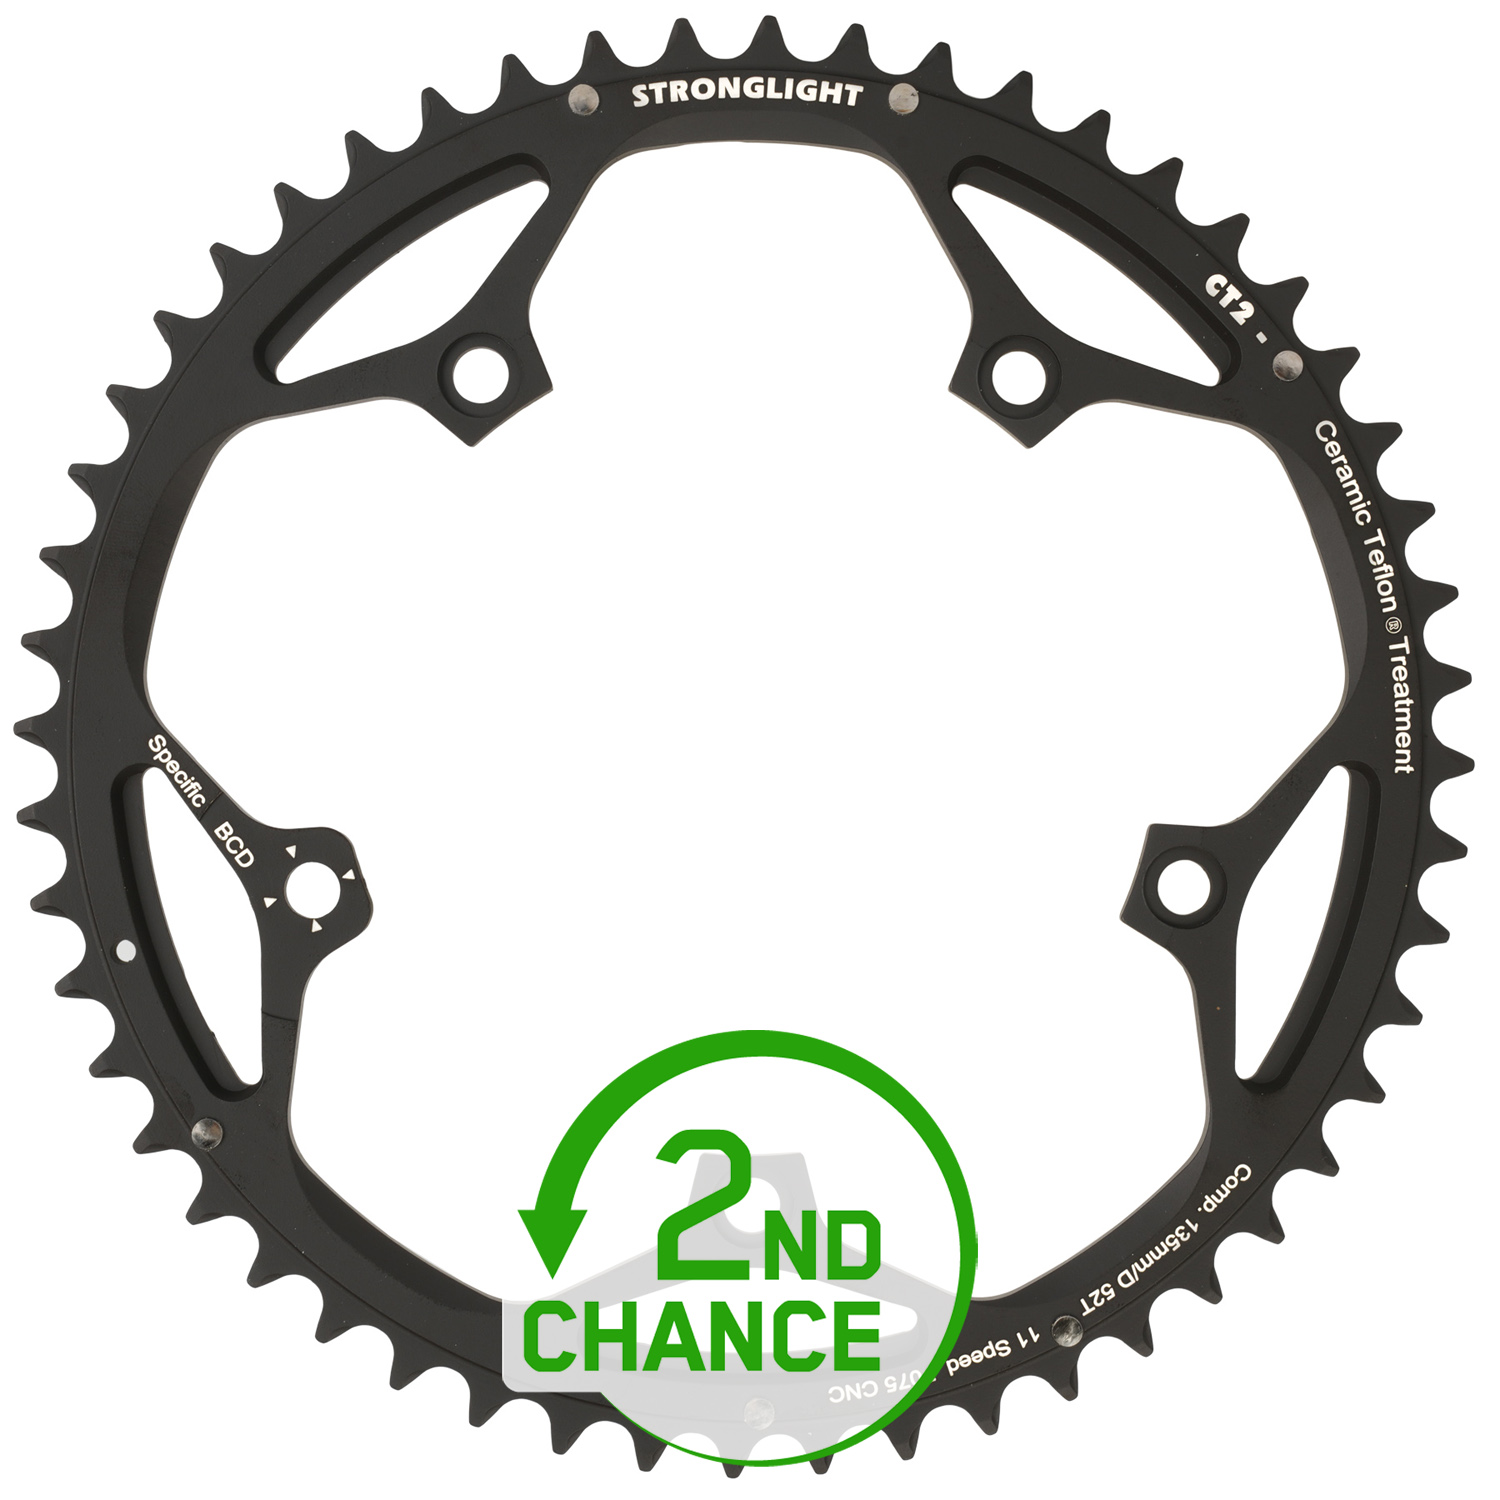 Picture of Stronglight CT2 Road Chainring - 5-Arm - 135mm - Campagnolo 11-Speed - Type D - black - 2nd Choice